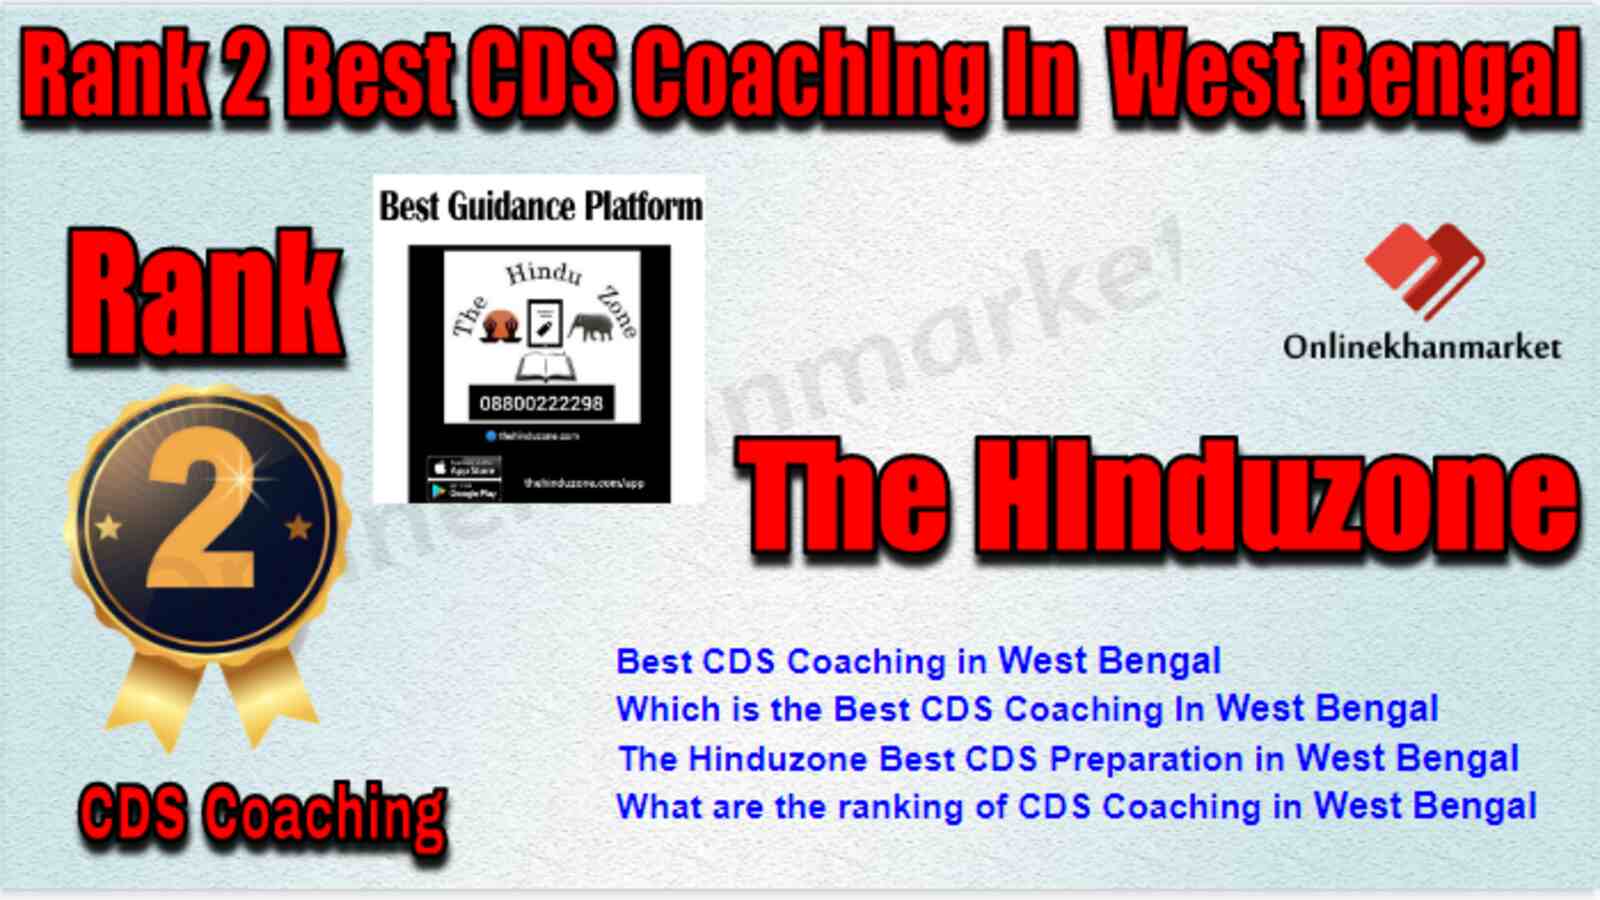 Rank 2 Best CDS Coaching in West Bengal